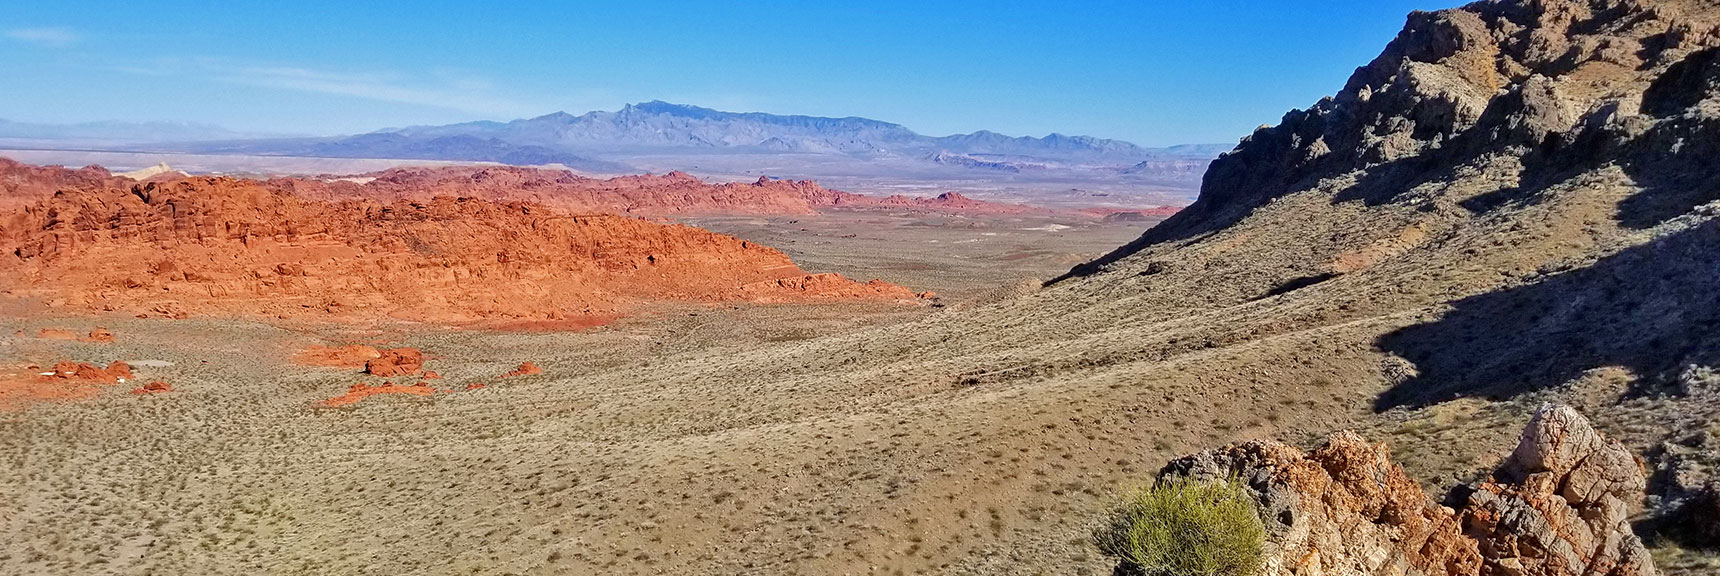 View Toward the Eastern End of the Park and Along the Muddy Mountains Southern Park Border | Valley of Fire State Park, Nevada Panorama